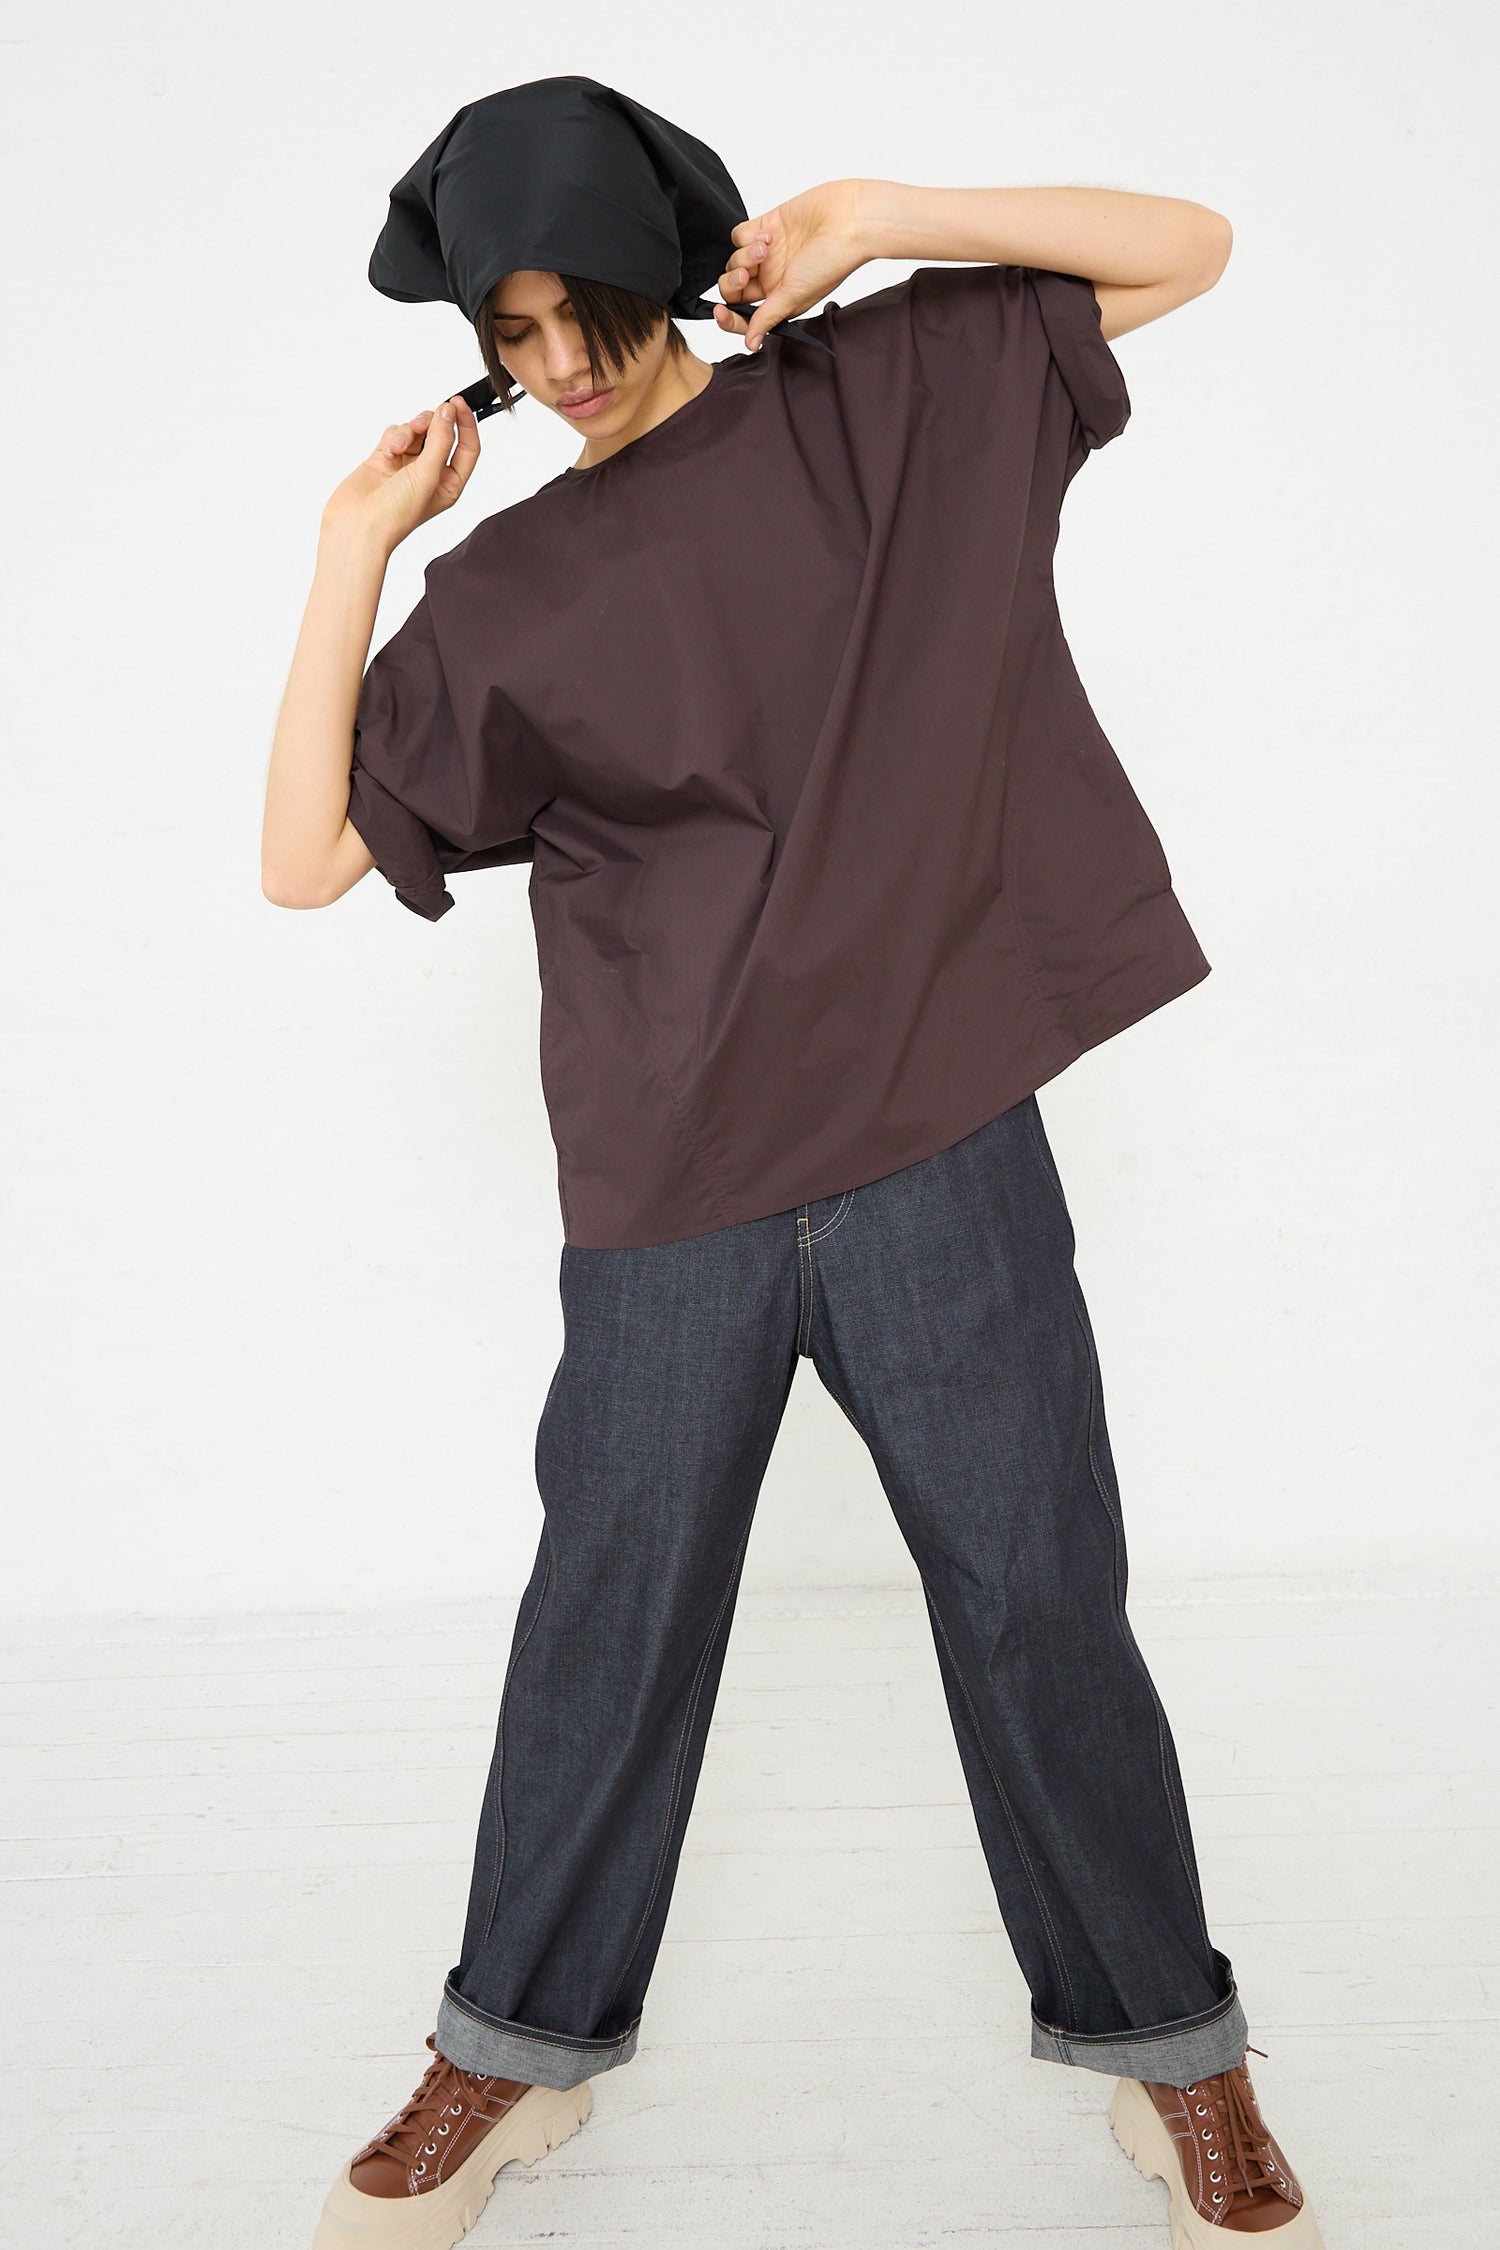 An oversized fit Cotton Poplin Bendol Top with Scarf in Ebony by Sofie D'Hoore, with side seam pockets, worn by a woman and jeans. Full length and front view.